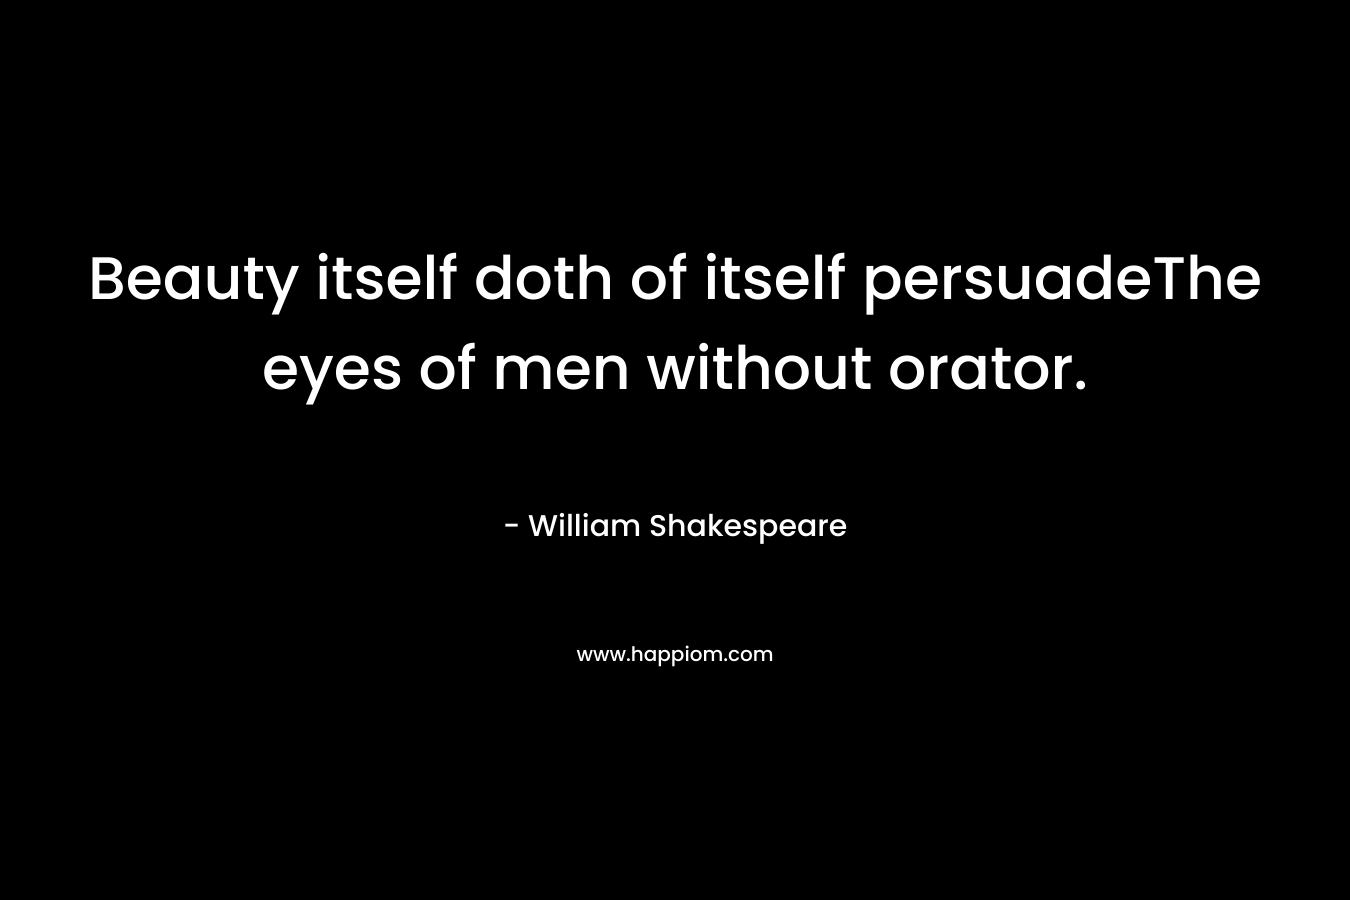 Beauty itself doth of itself persuadeThe eyes of men without orator. – William Shakespeare